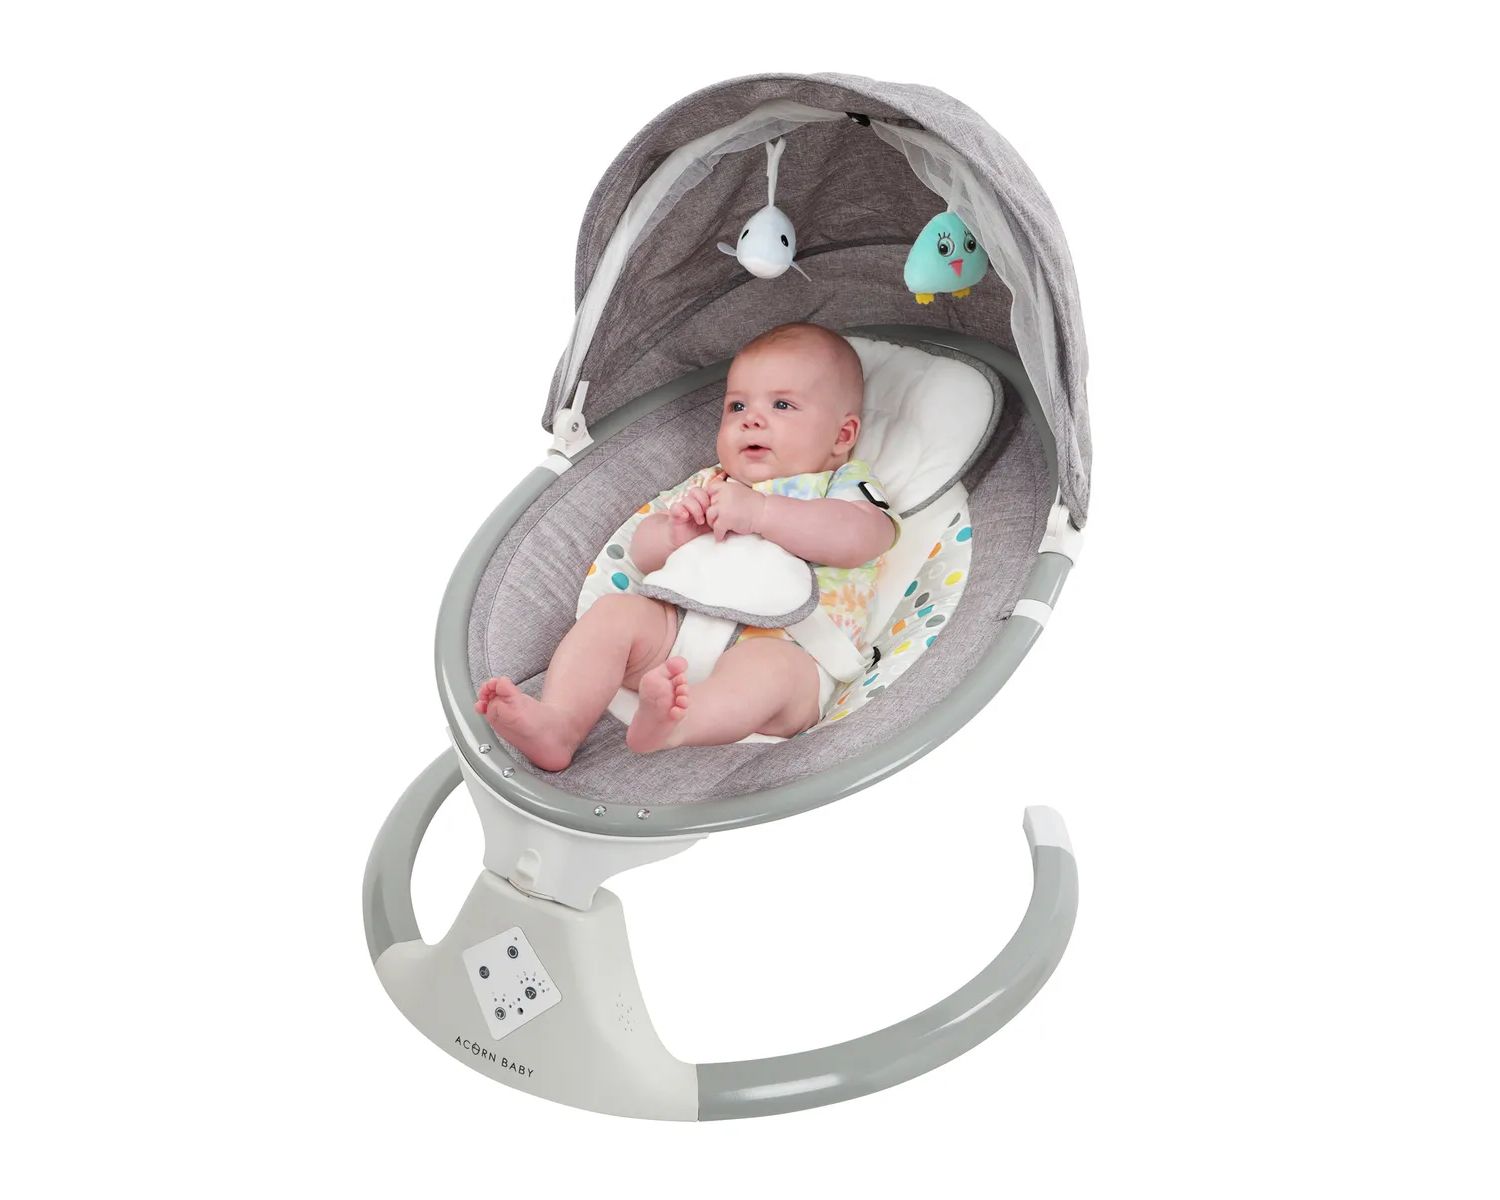 Baby Electric Swing Review: The Perfect Solution for Soothing Your Little One